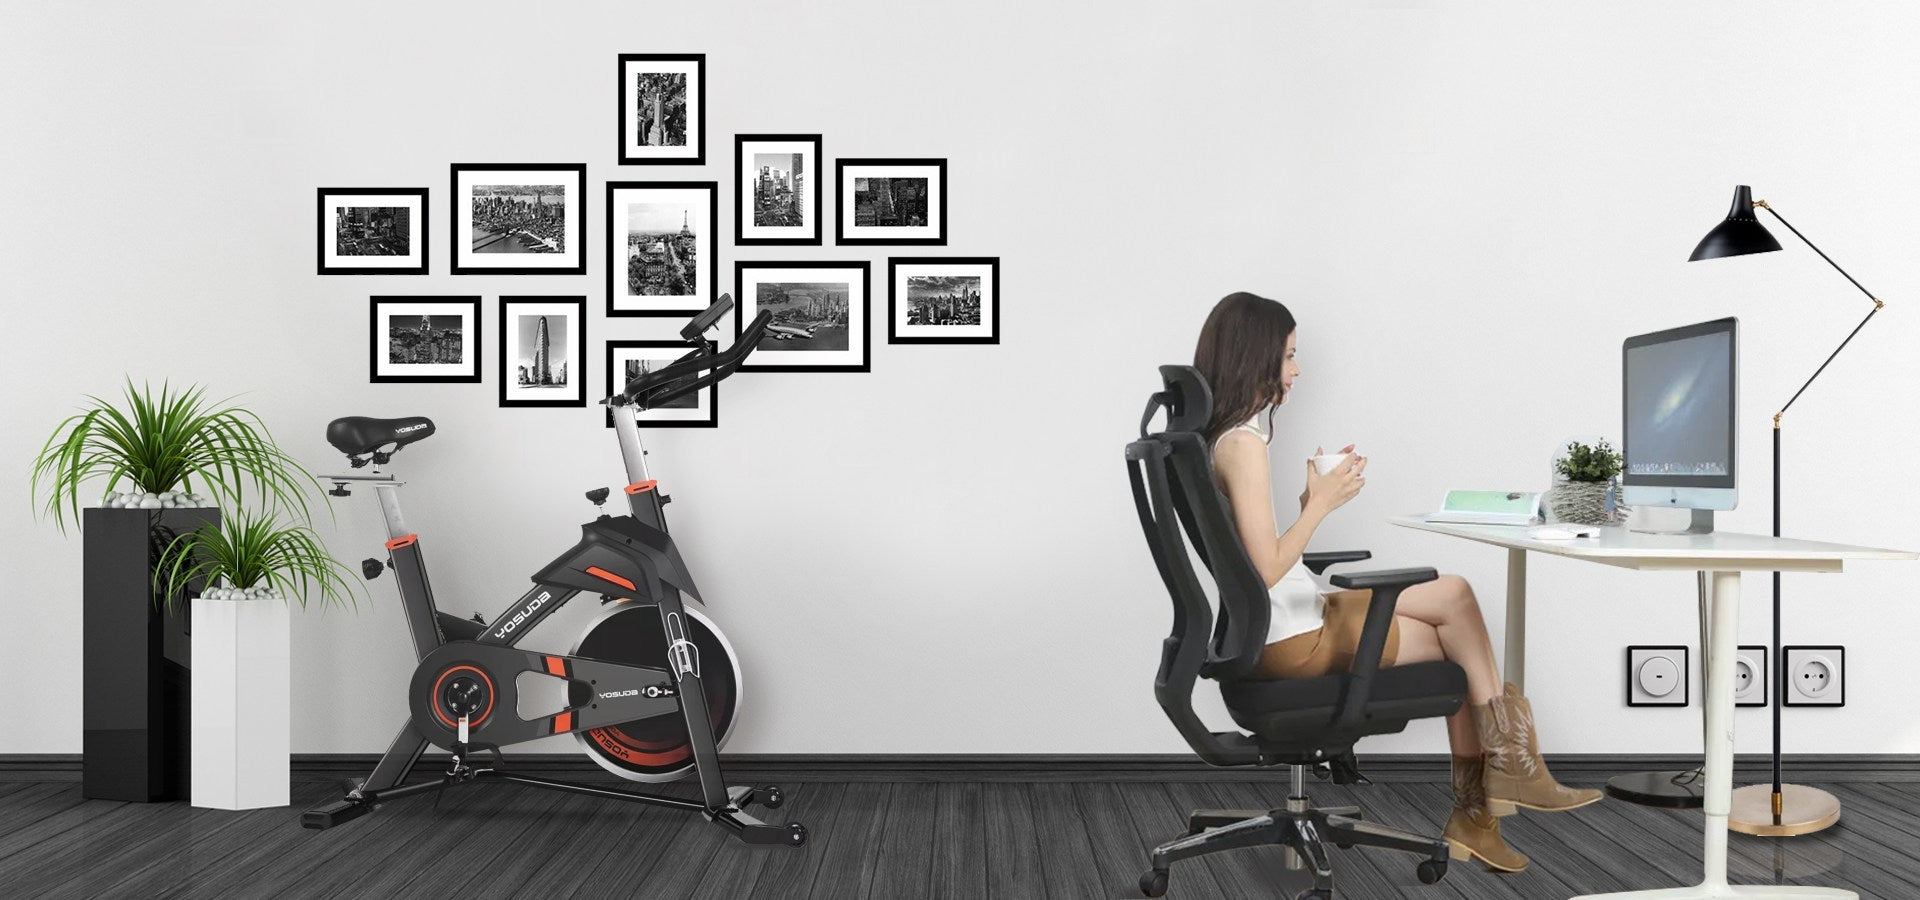 Odinlake-Rolls-Out-Ergo-Chair-Series-in-American-Market-Promotes-Healthy-Sitting-Posture-in-the-Home-Office OdinLake